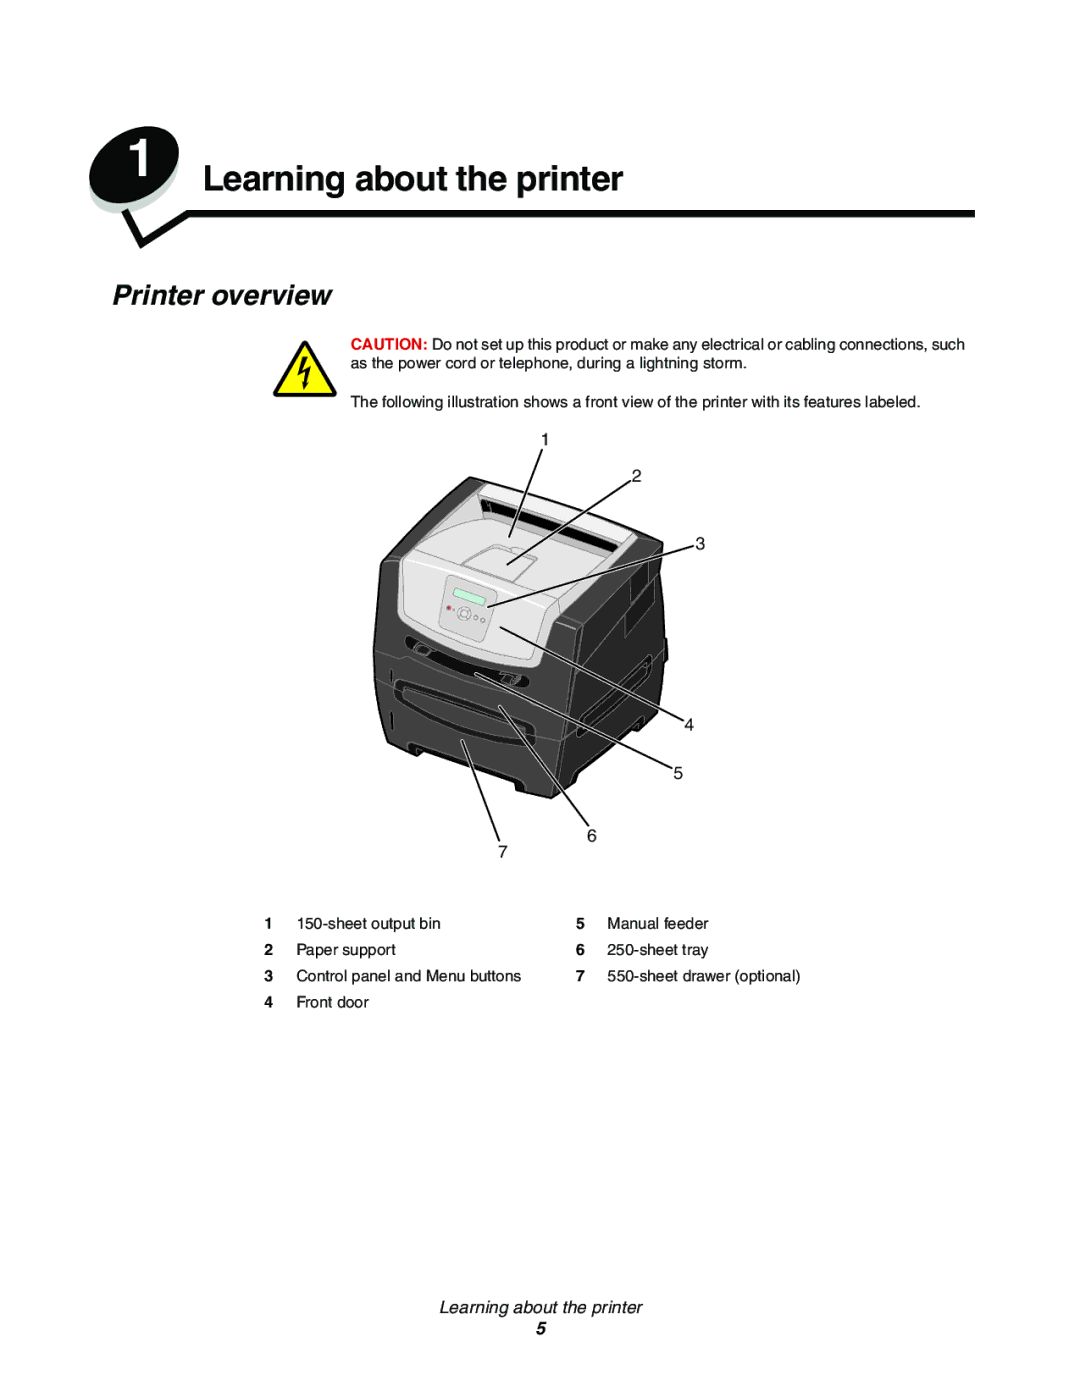 Lexmark E352DN manual Learning about the printer, Printer overview 